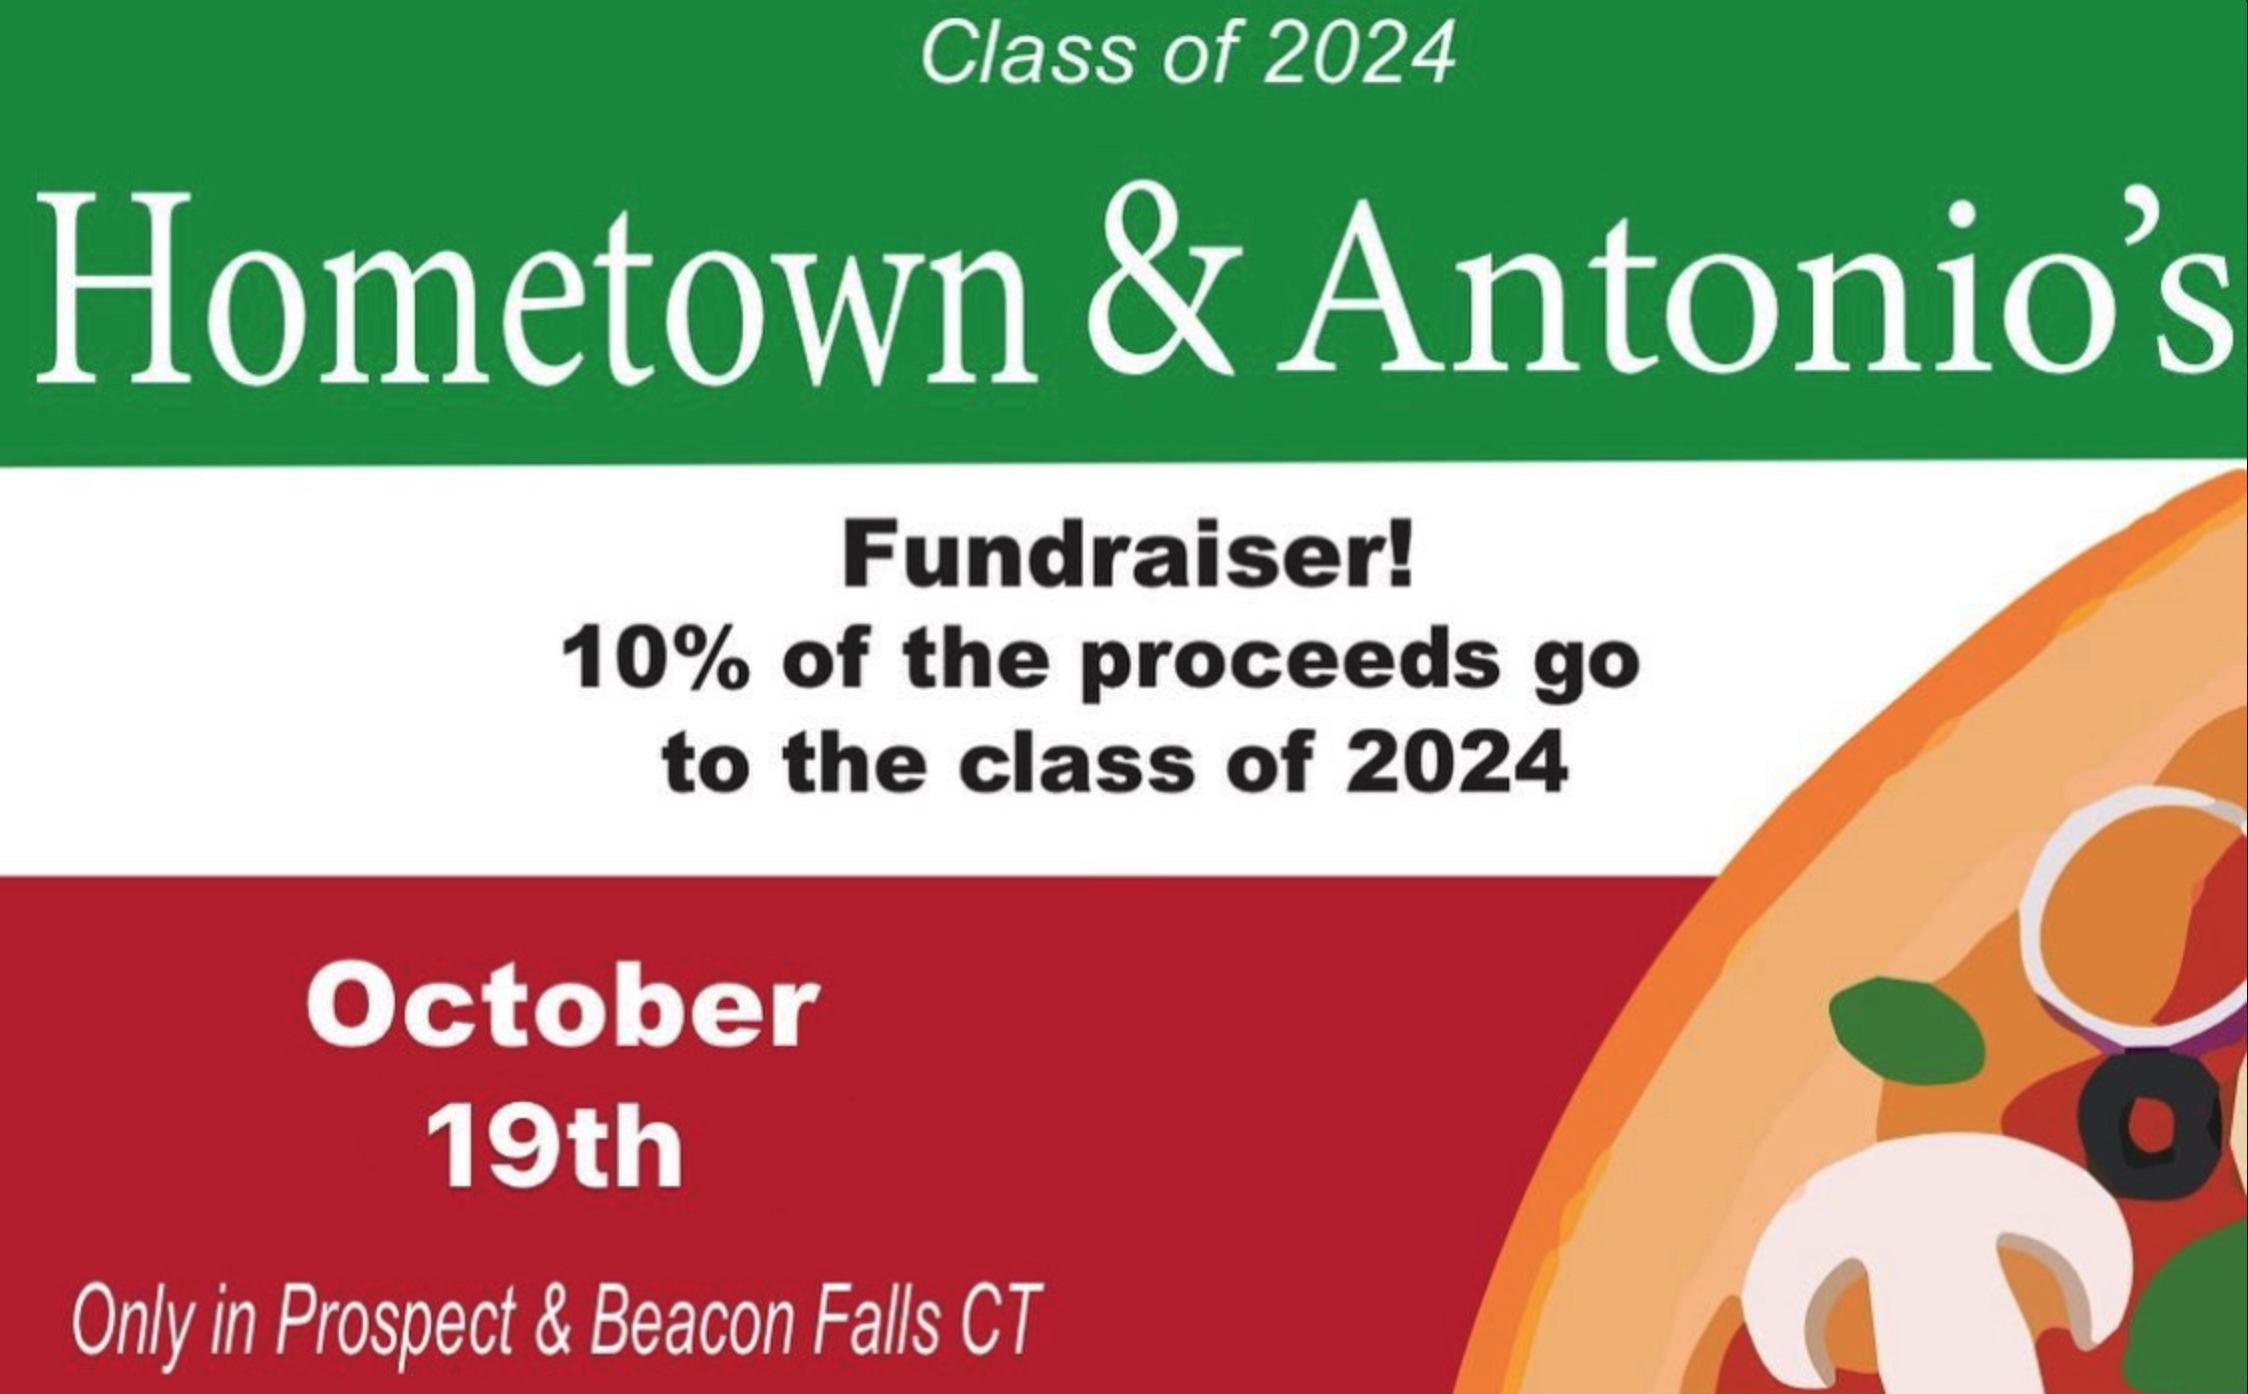 Order Up! Class of 2024 Takes Over Hometown and Antonio’s Pizza